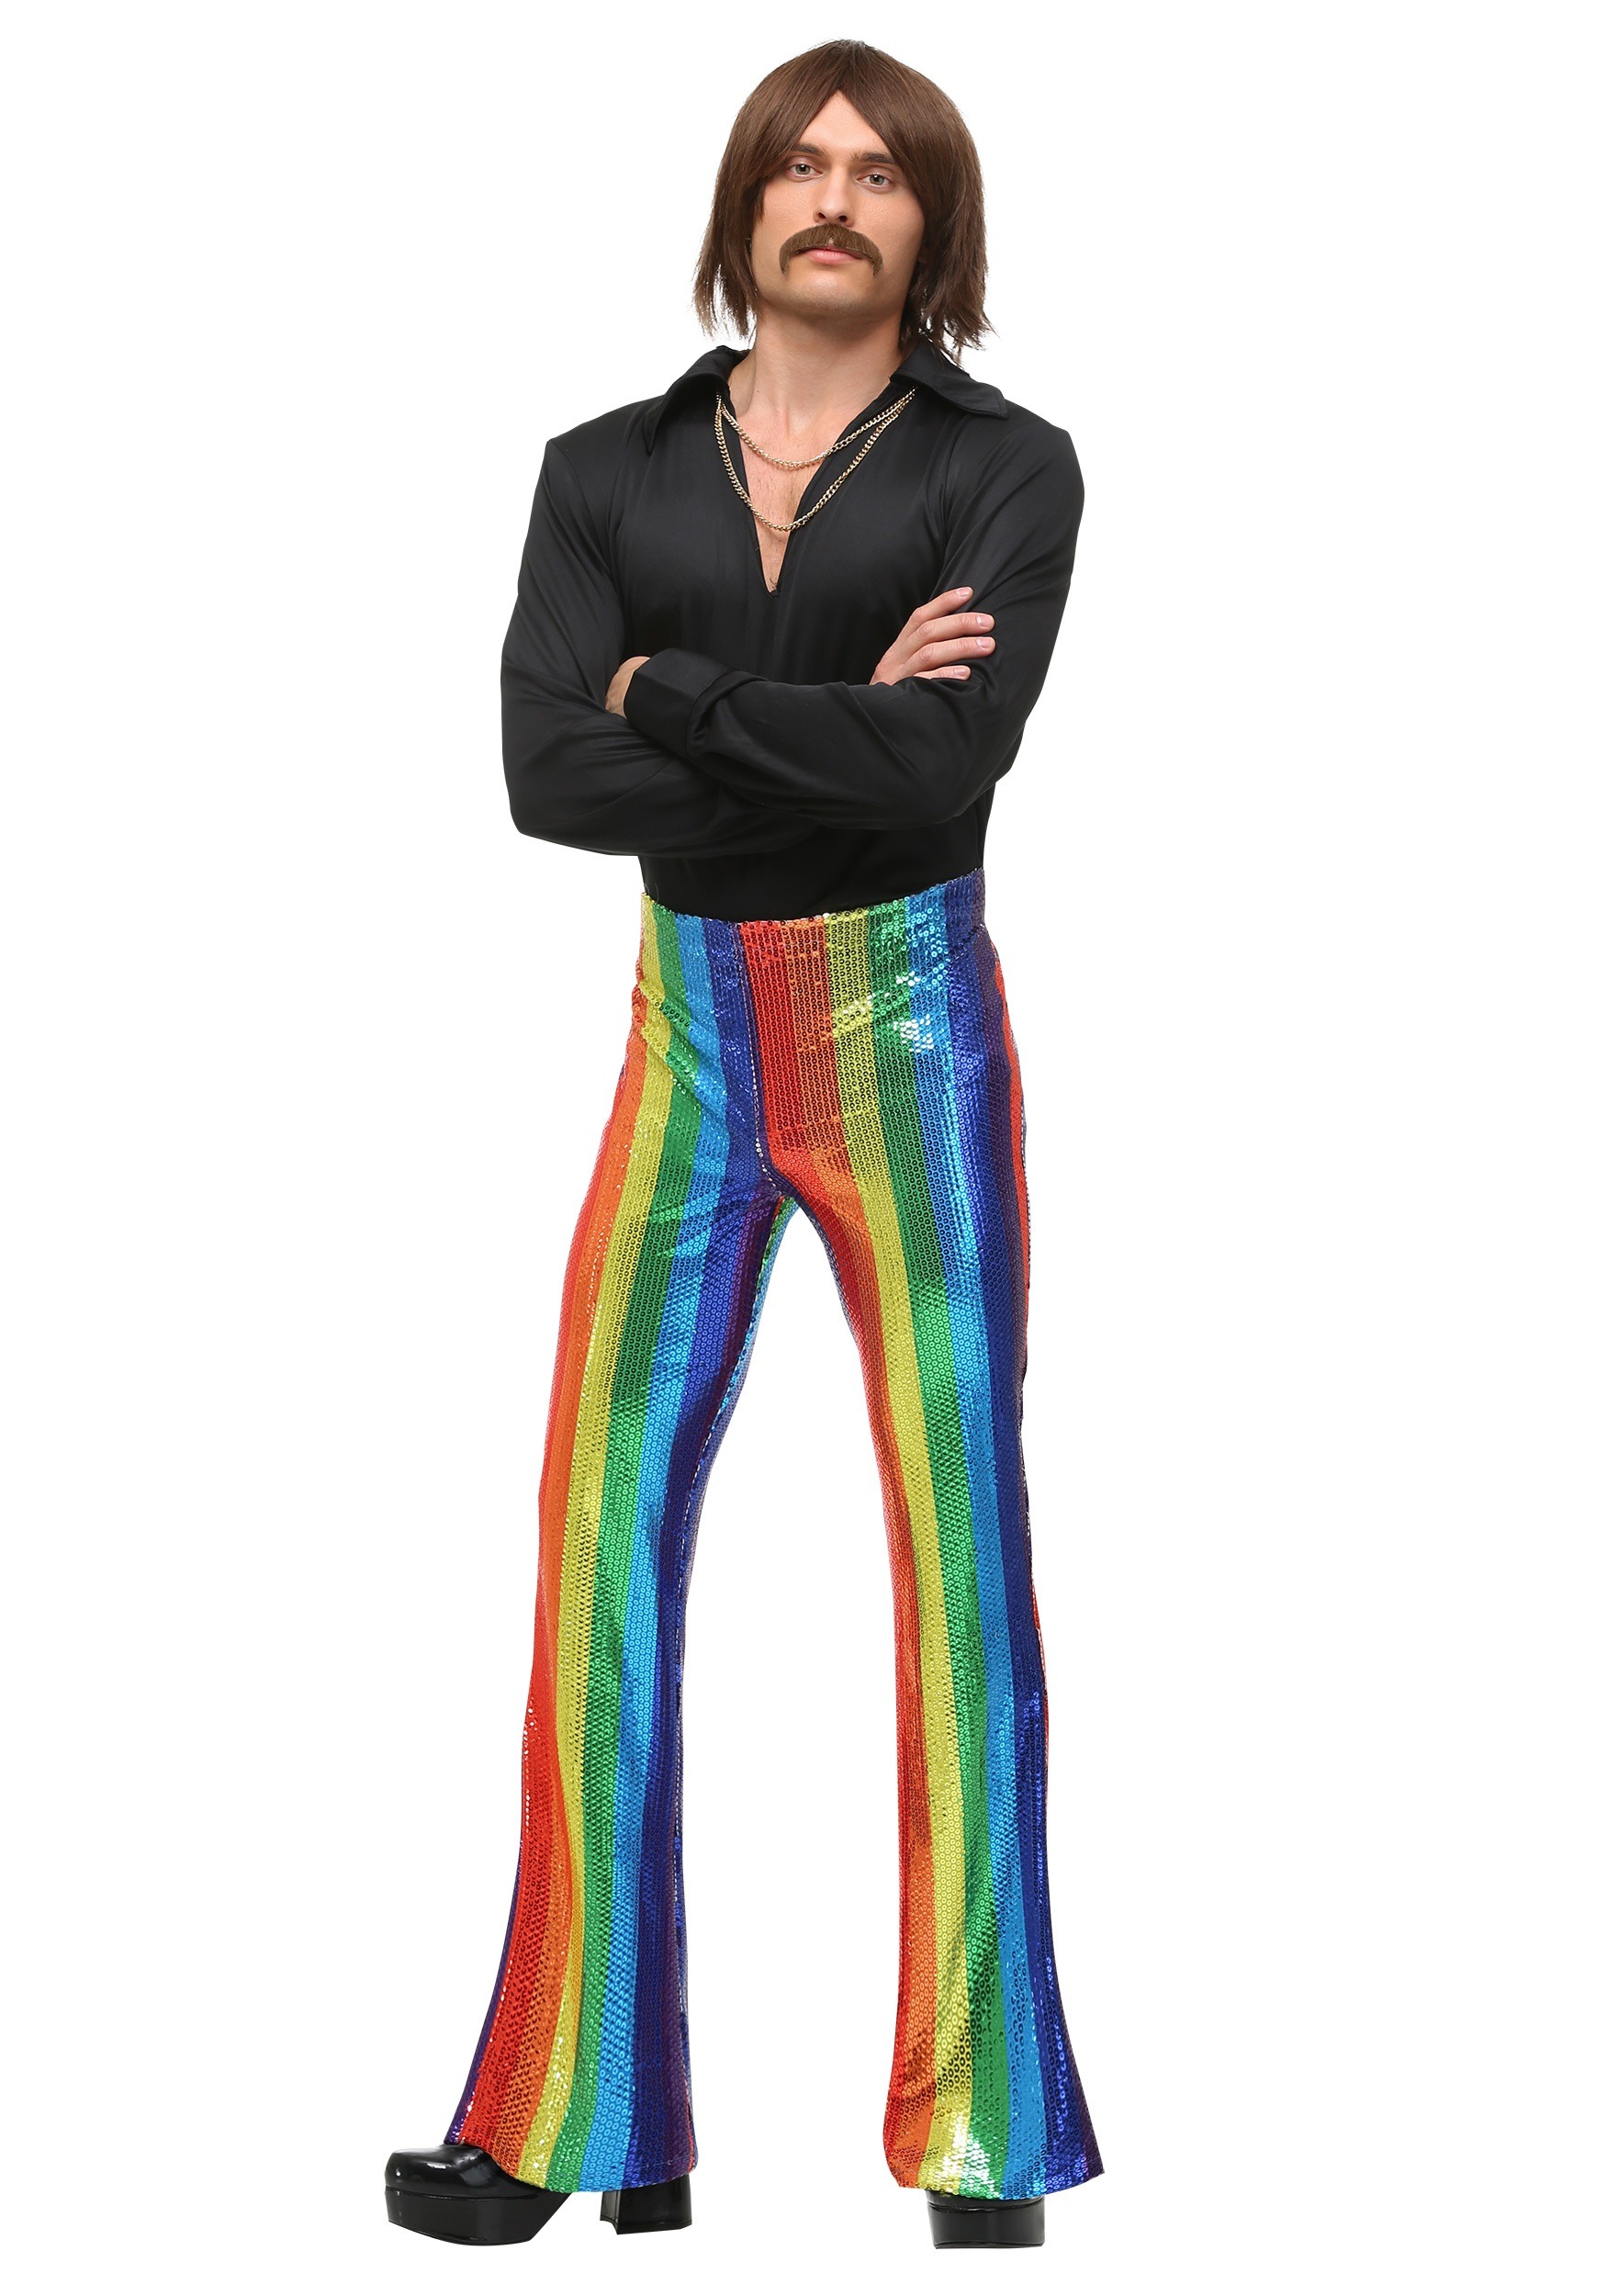 wrench Meaningful harm Men's Disco King Costume w/ 70s Sequin Rainbow Pants